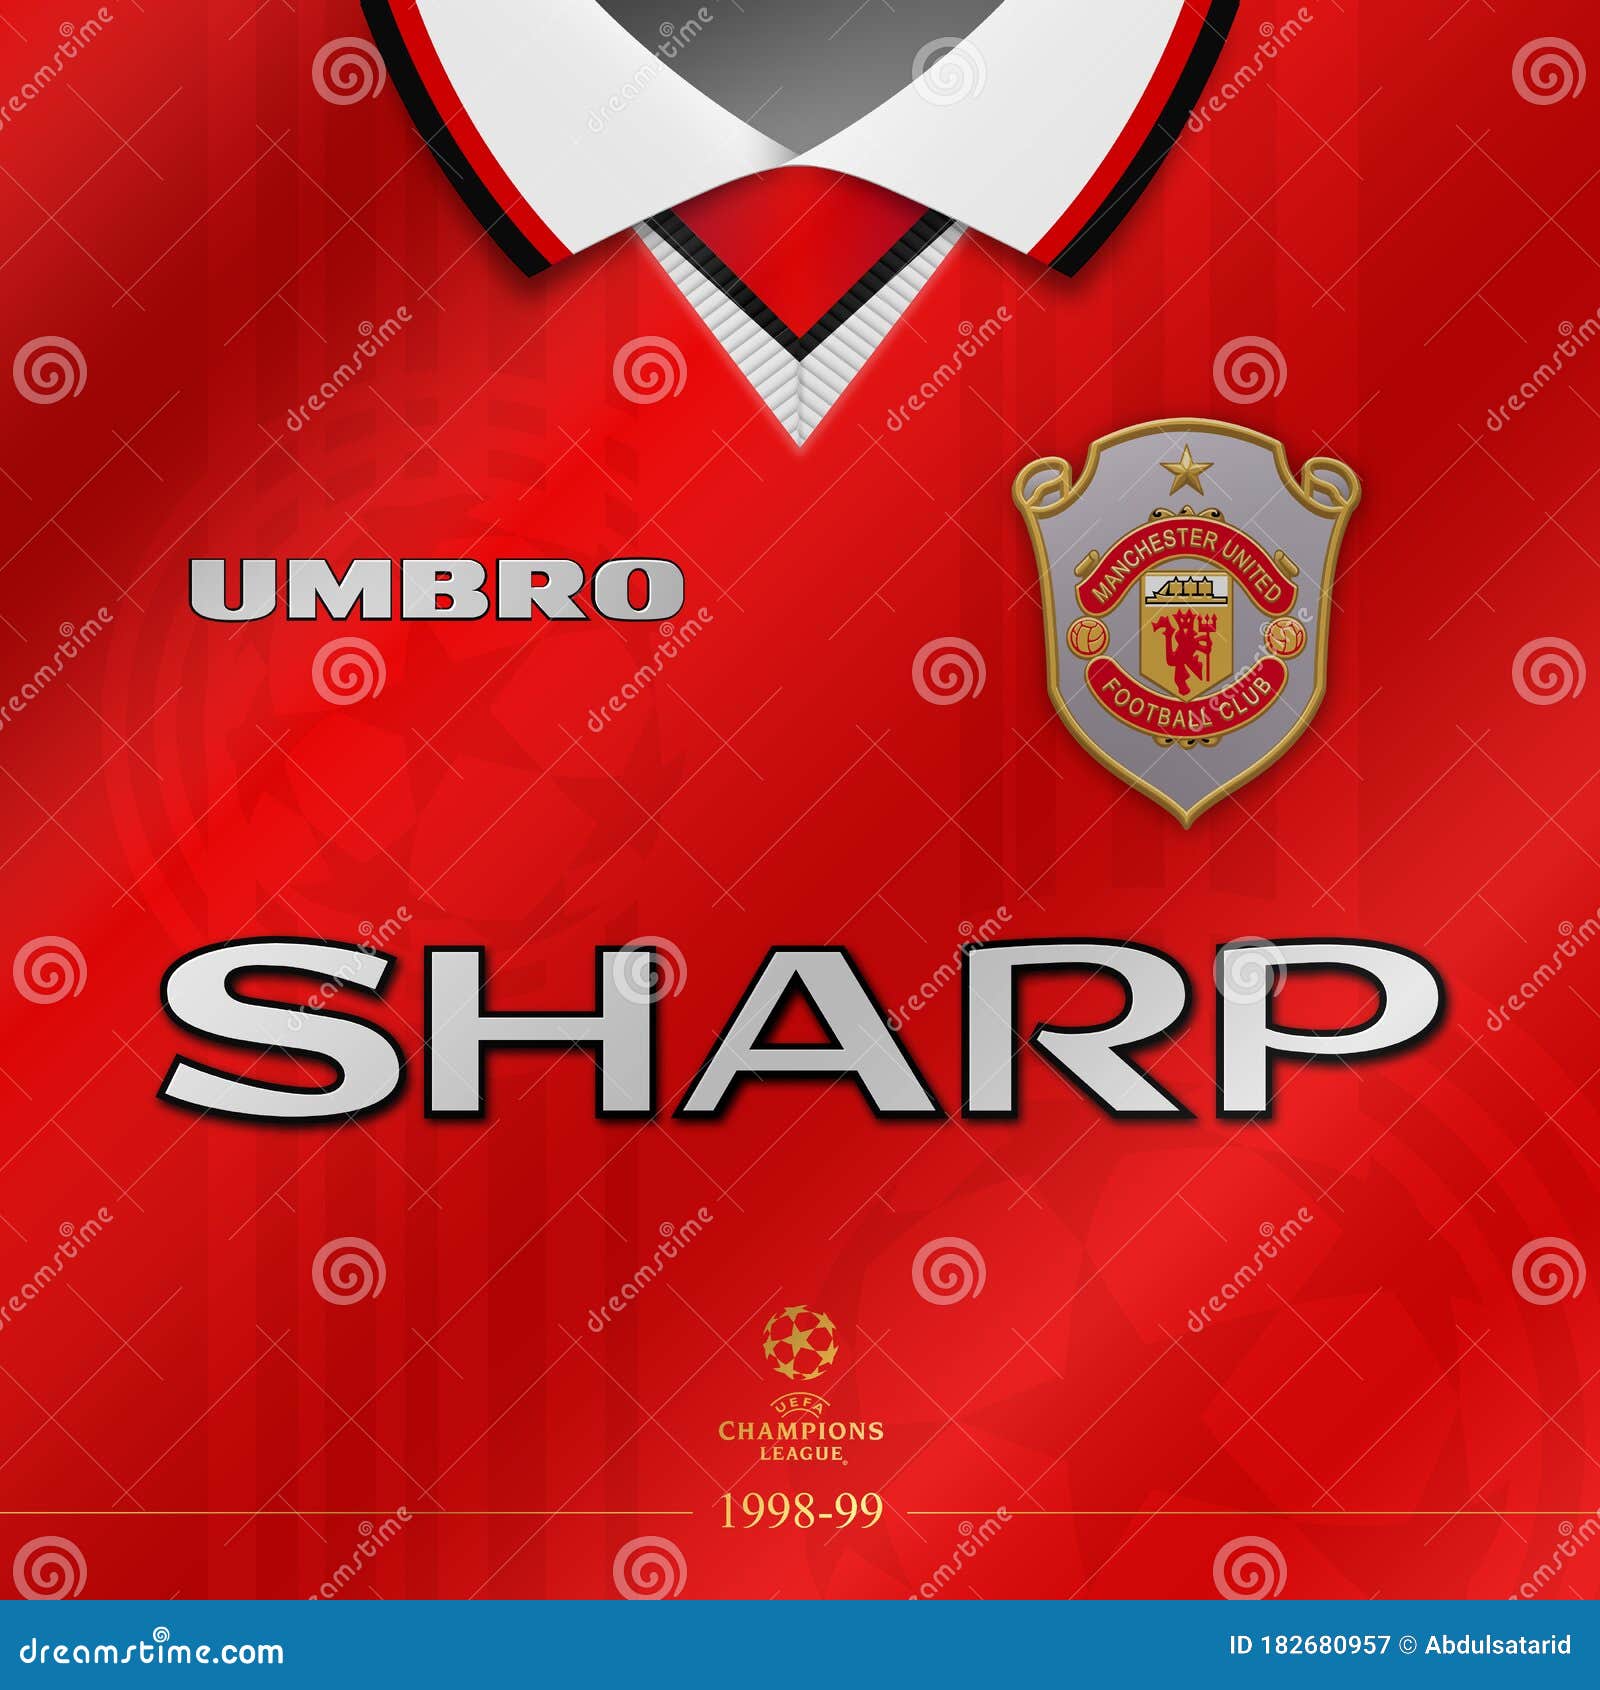 manchester united champions league jersey